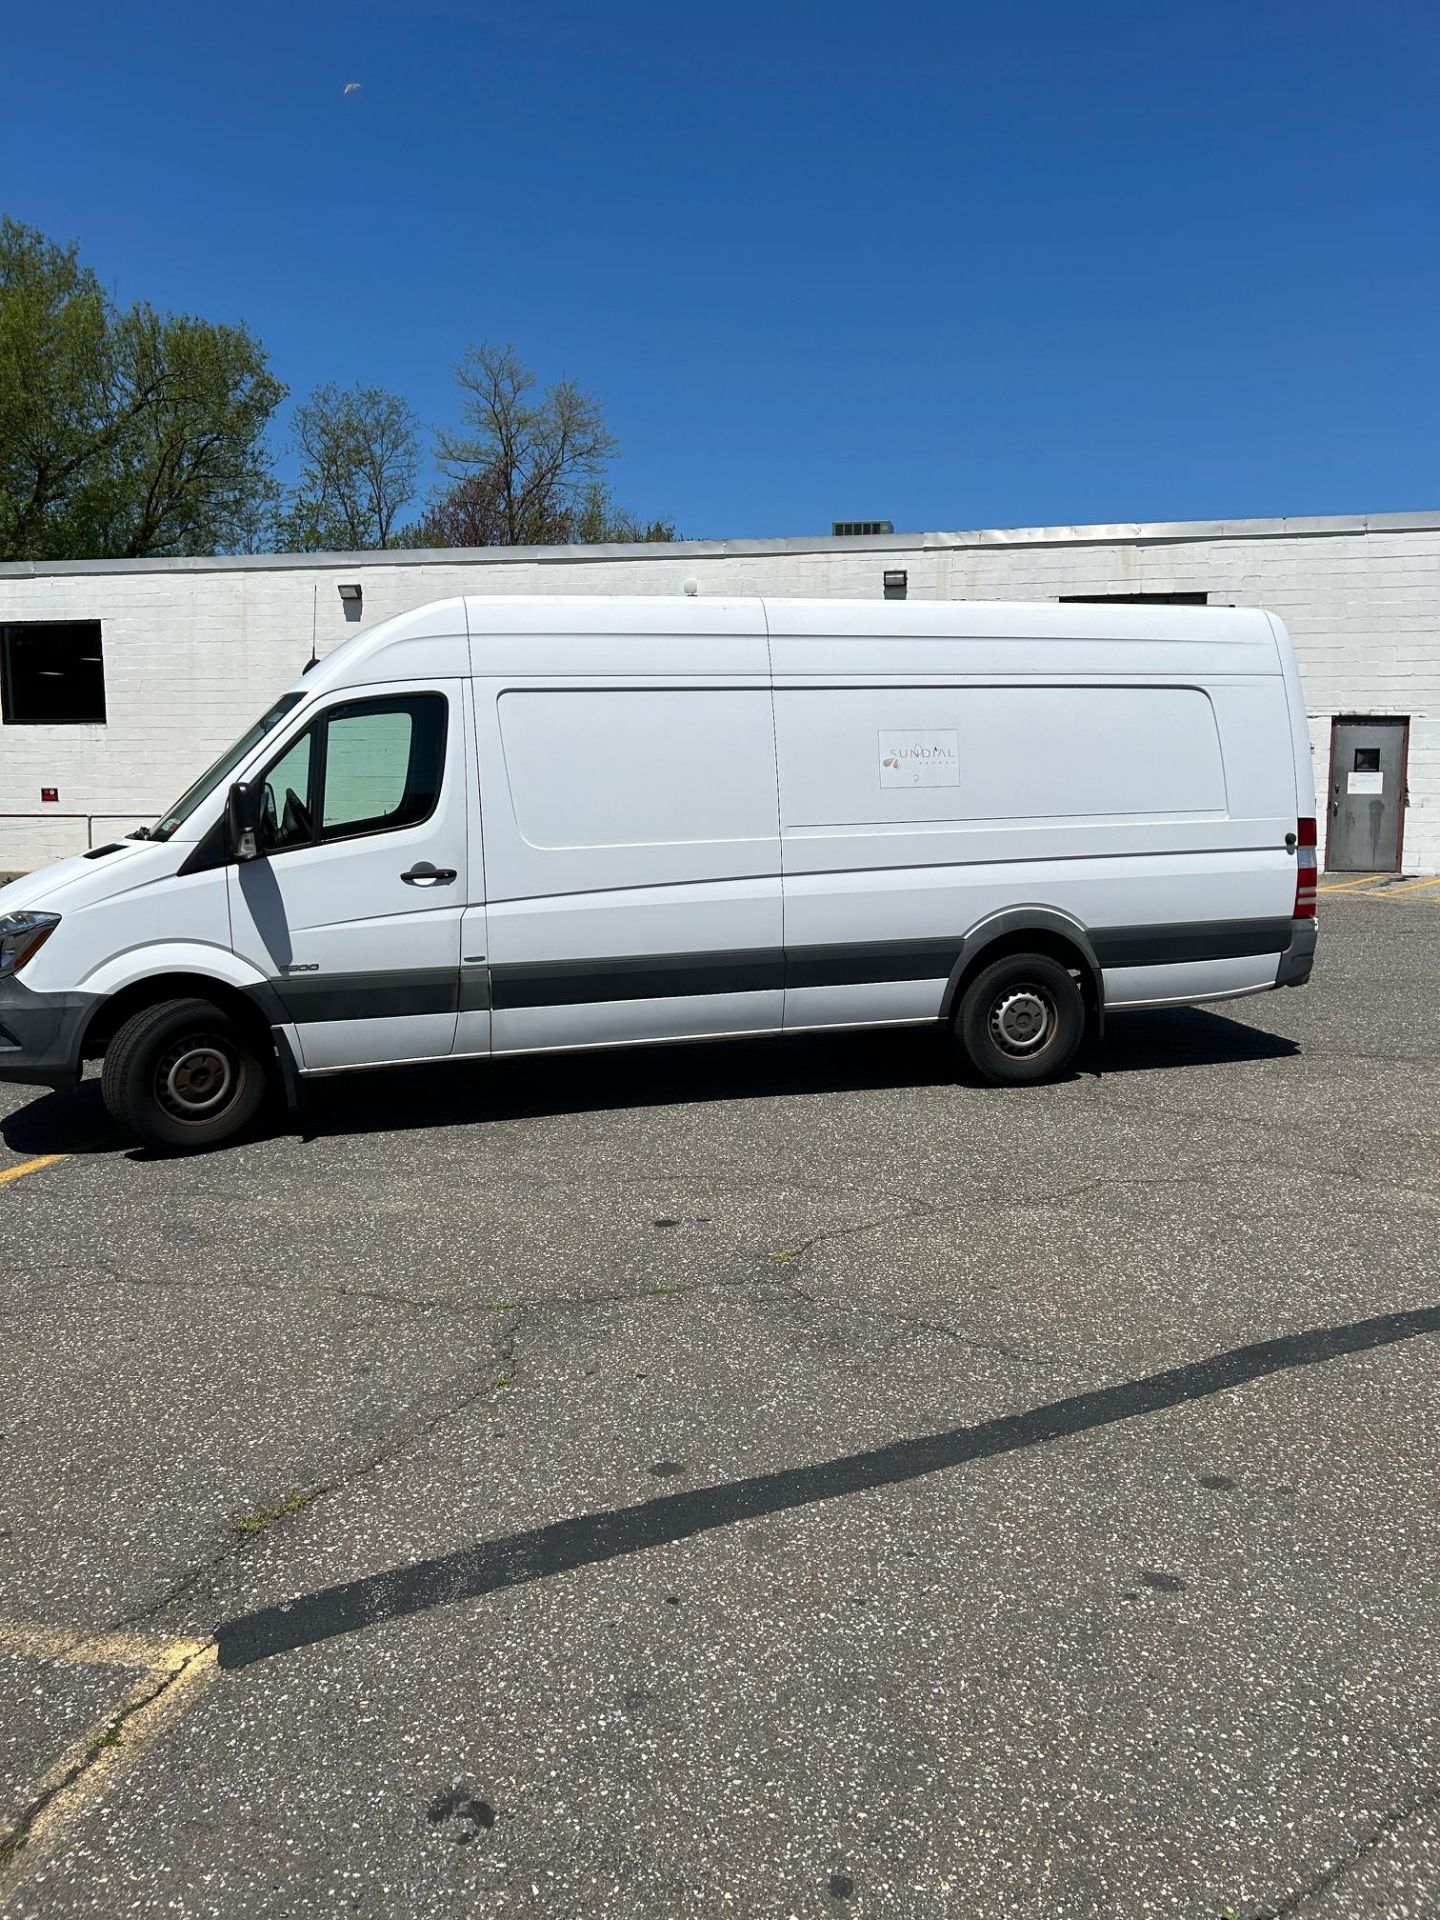 2014 Mercedes Diesel Cargo Van, Automatic Transmission, Approx. 48899 Miles. - Image 6 of 9